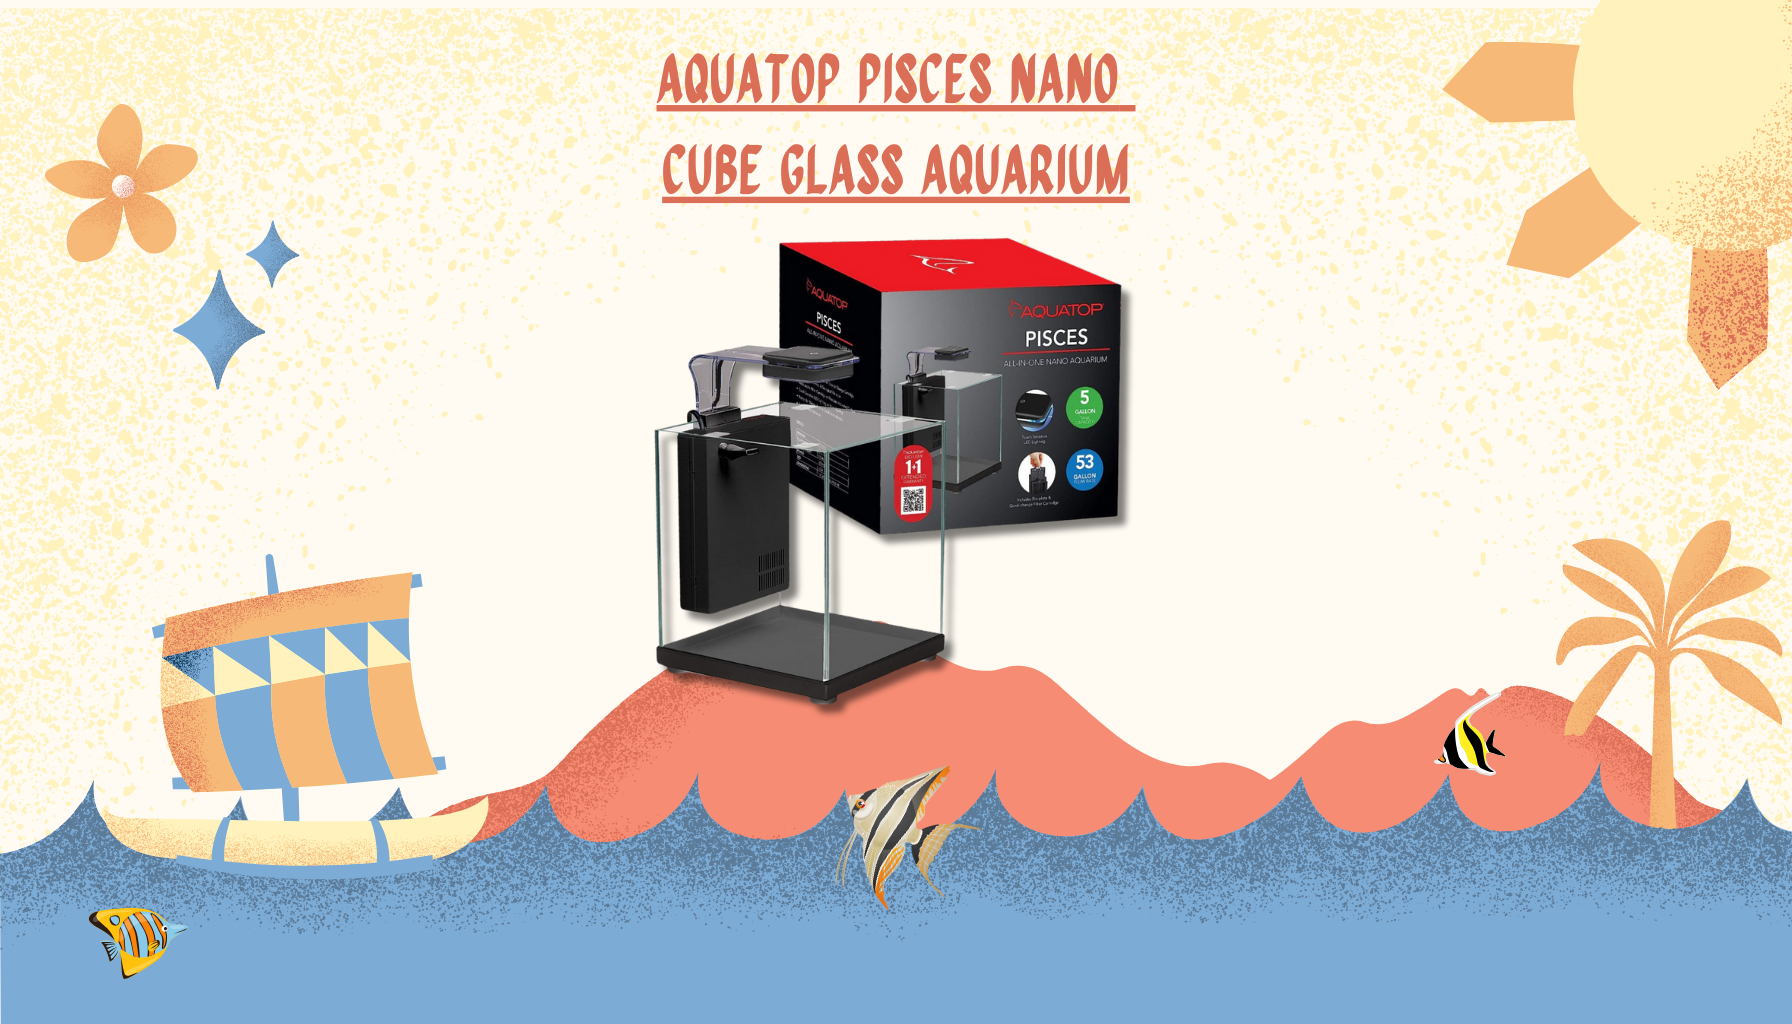 A whimsical beach-themed illustration featuring the Aquatop Pisces Nano Cube Glass Aquarium, with cartoon fish, a ship, and palm trees, conveying a playful guide to setting up a small aquarium for angelfish.